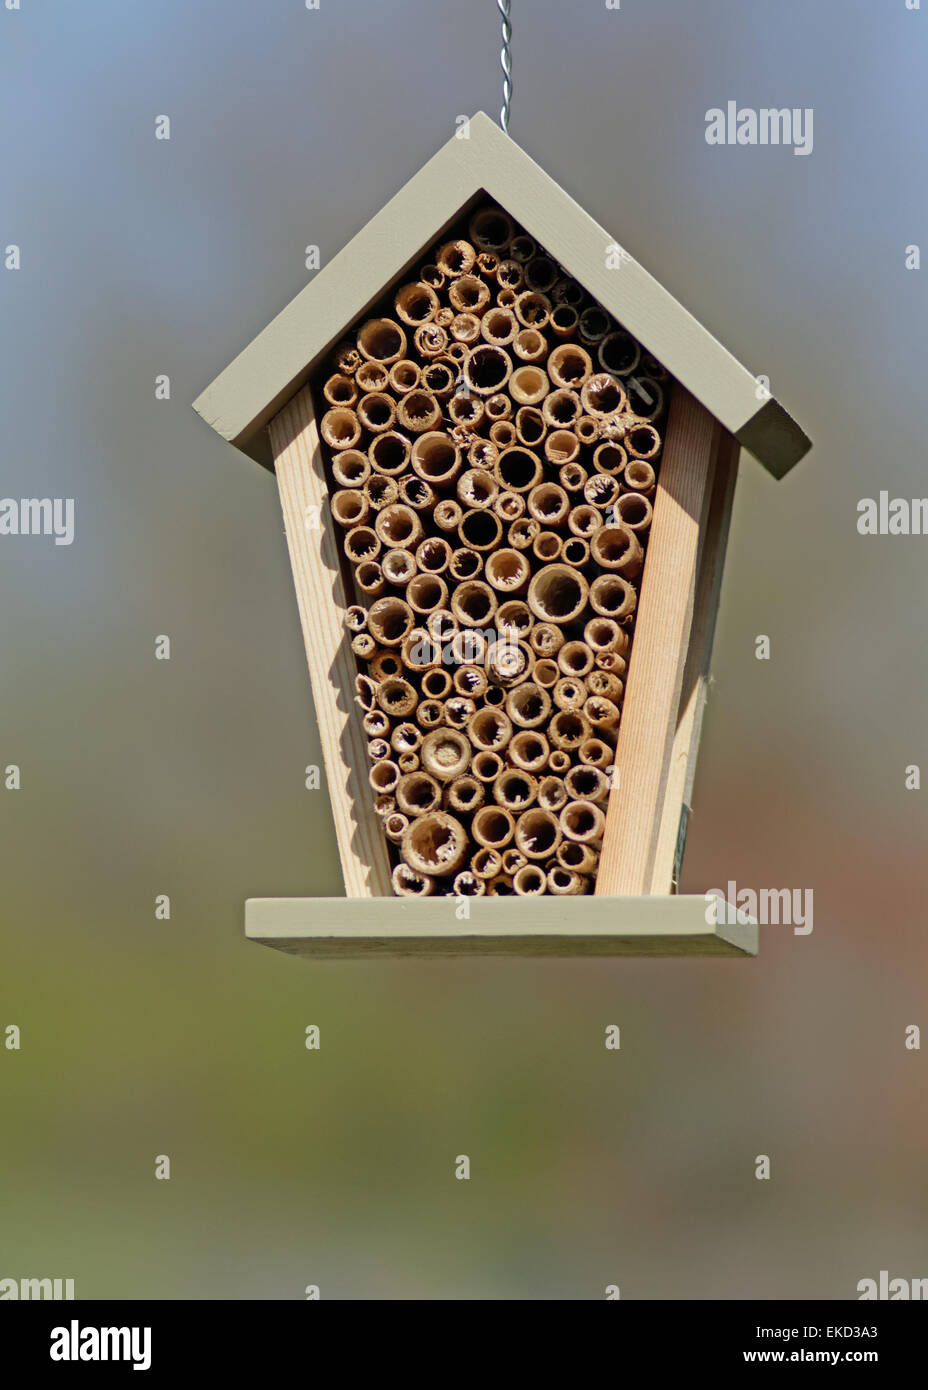 Beneficial Insect House. Stock Photo